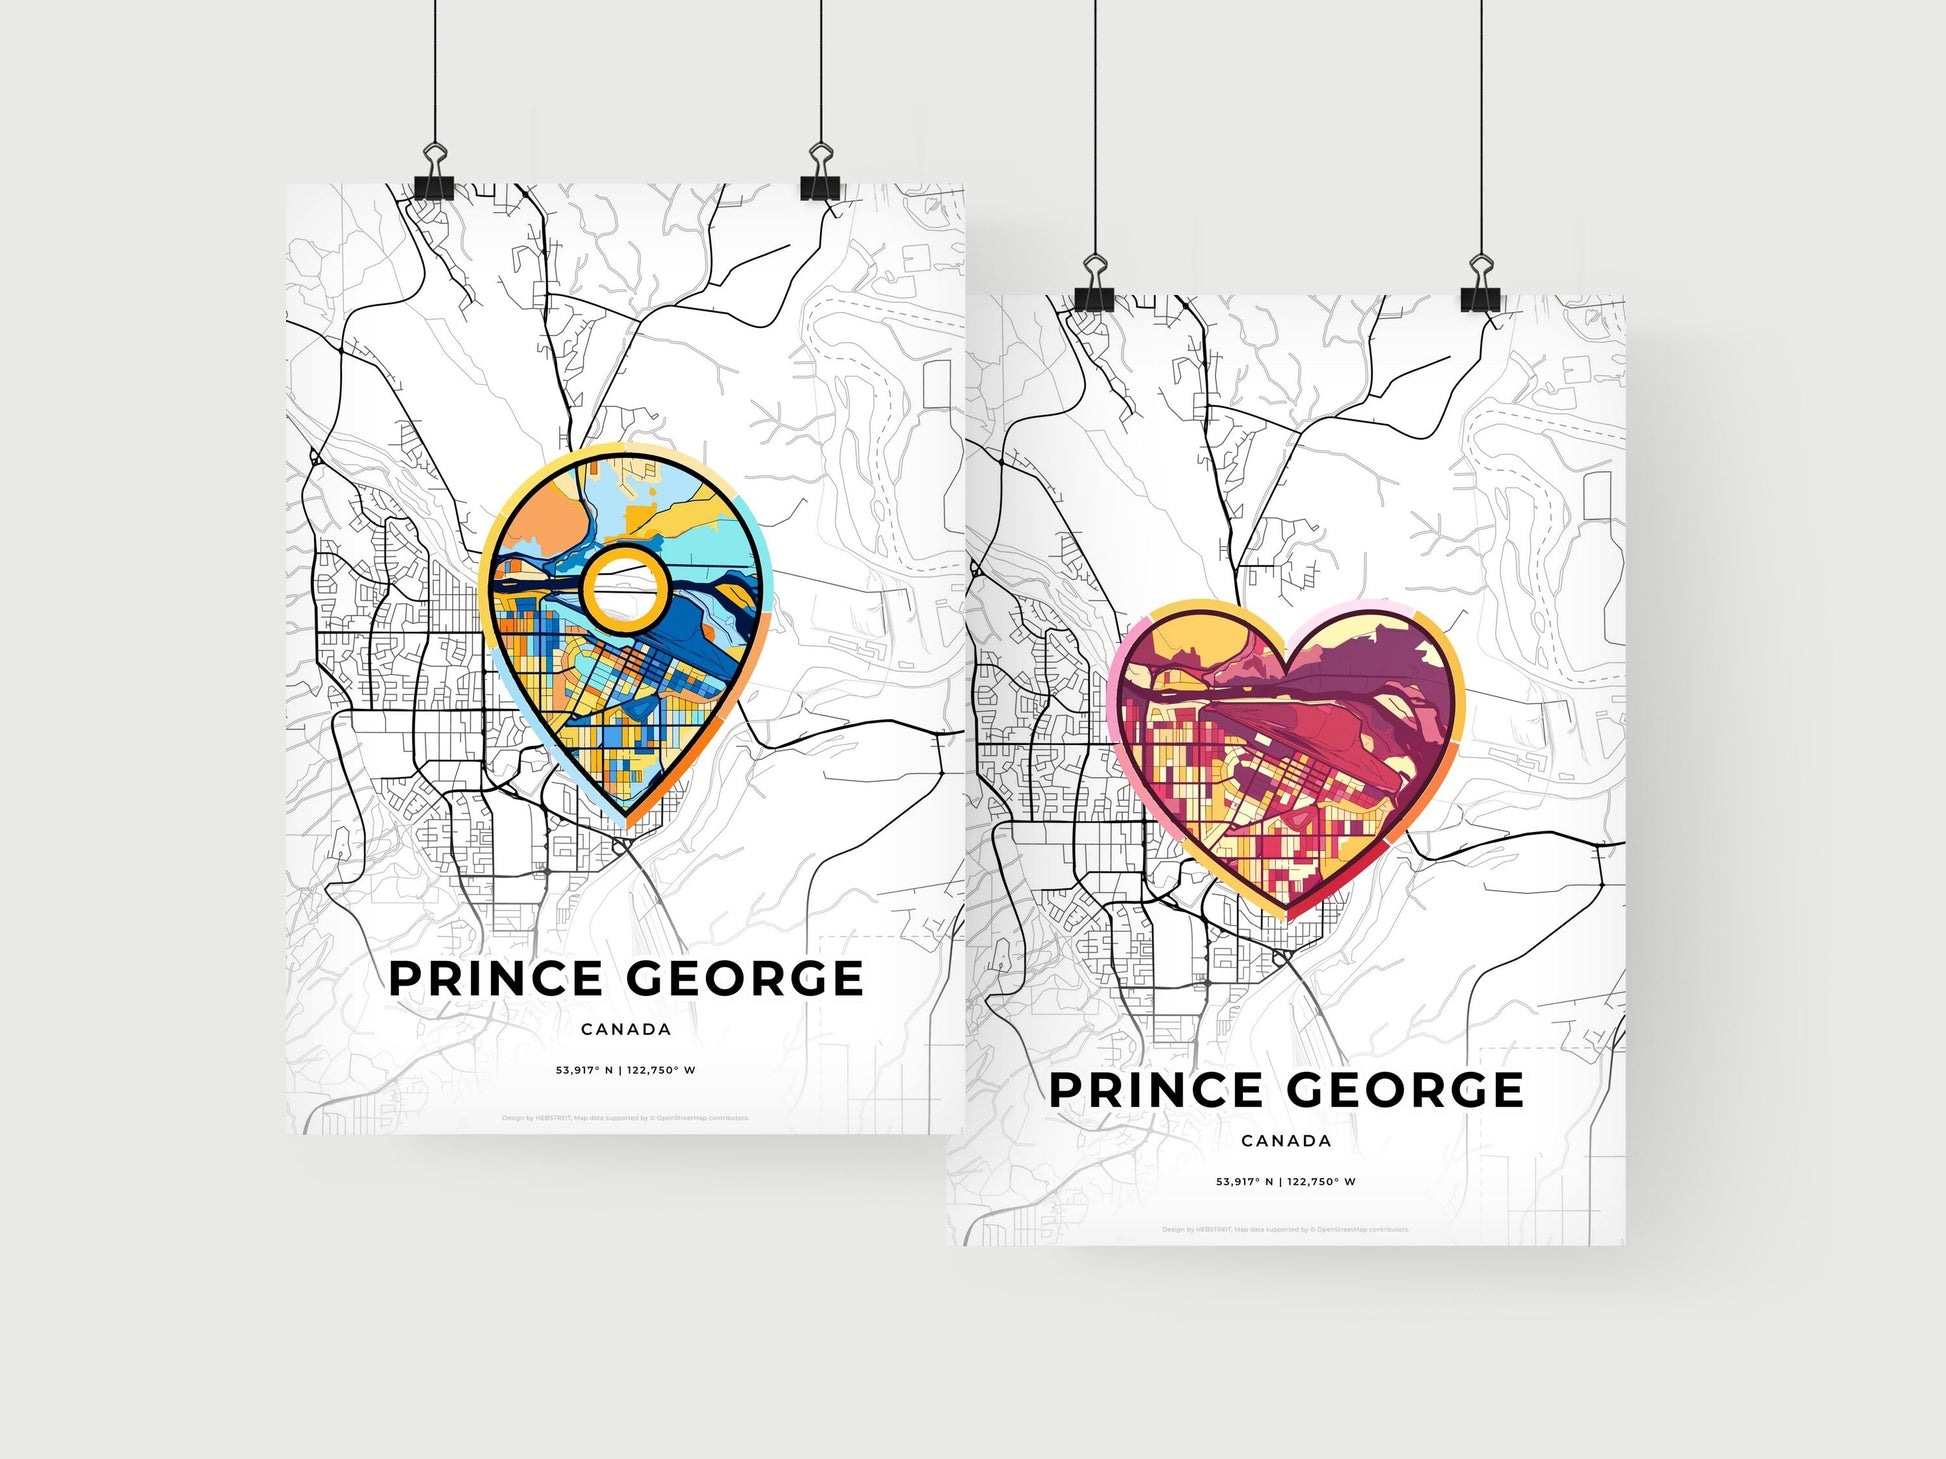 PRINCE GEORGE CANADA minimal art map with a colorful icon.